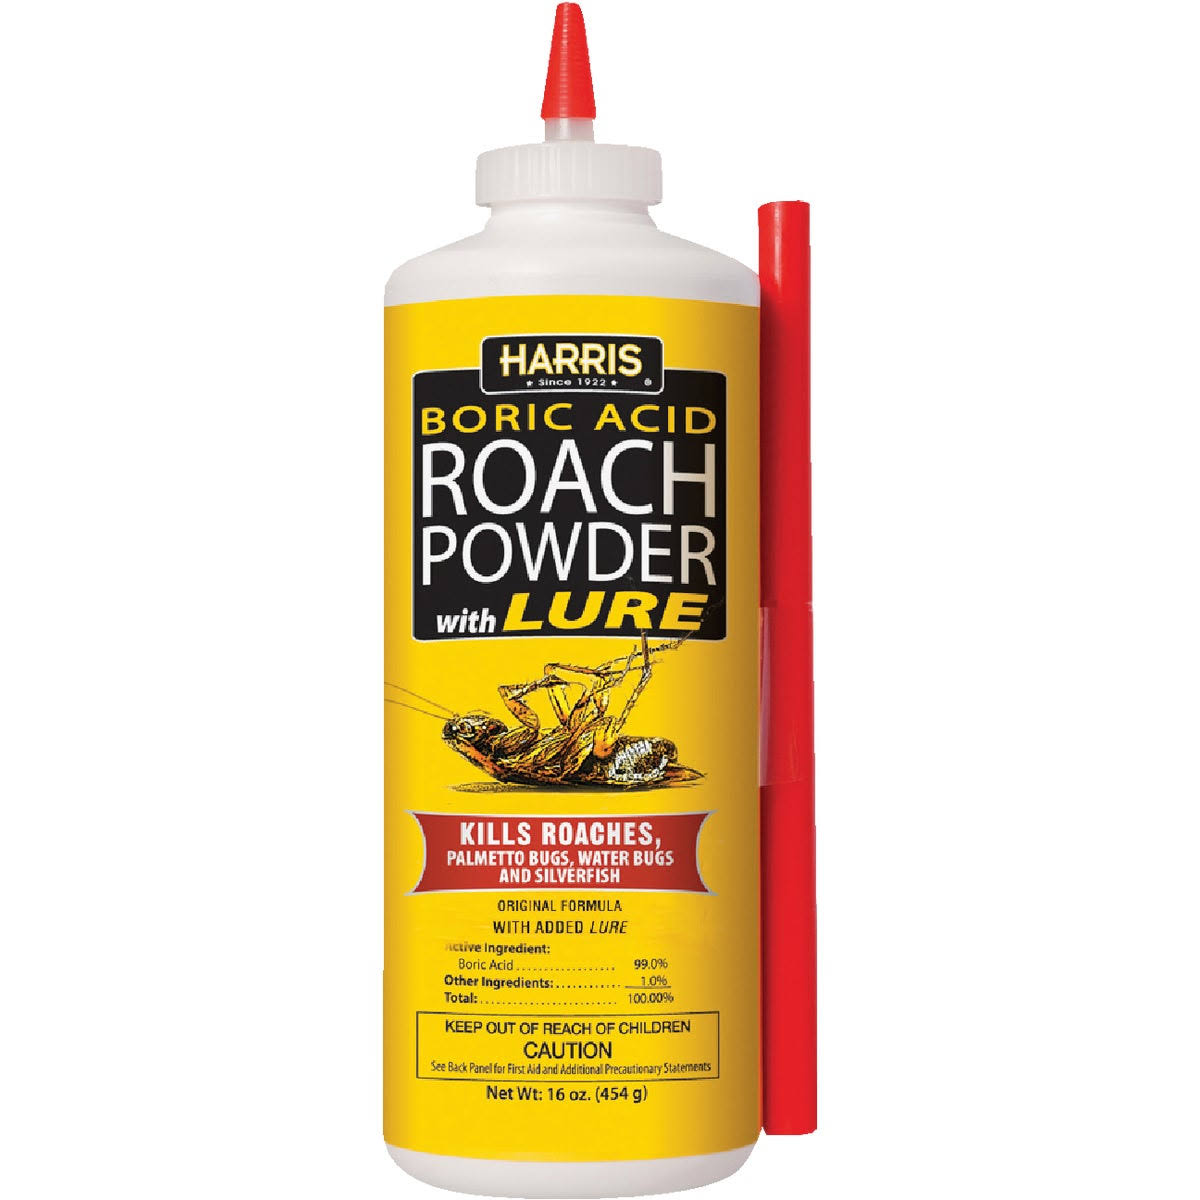 Harris Boric Acid Roach Powder Insect Killer - with Lure, 16oz